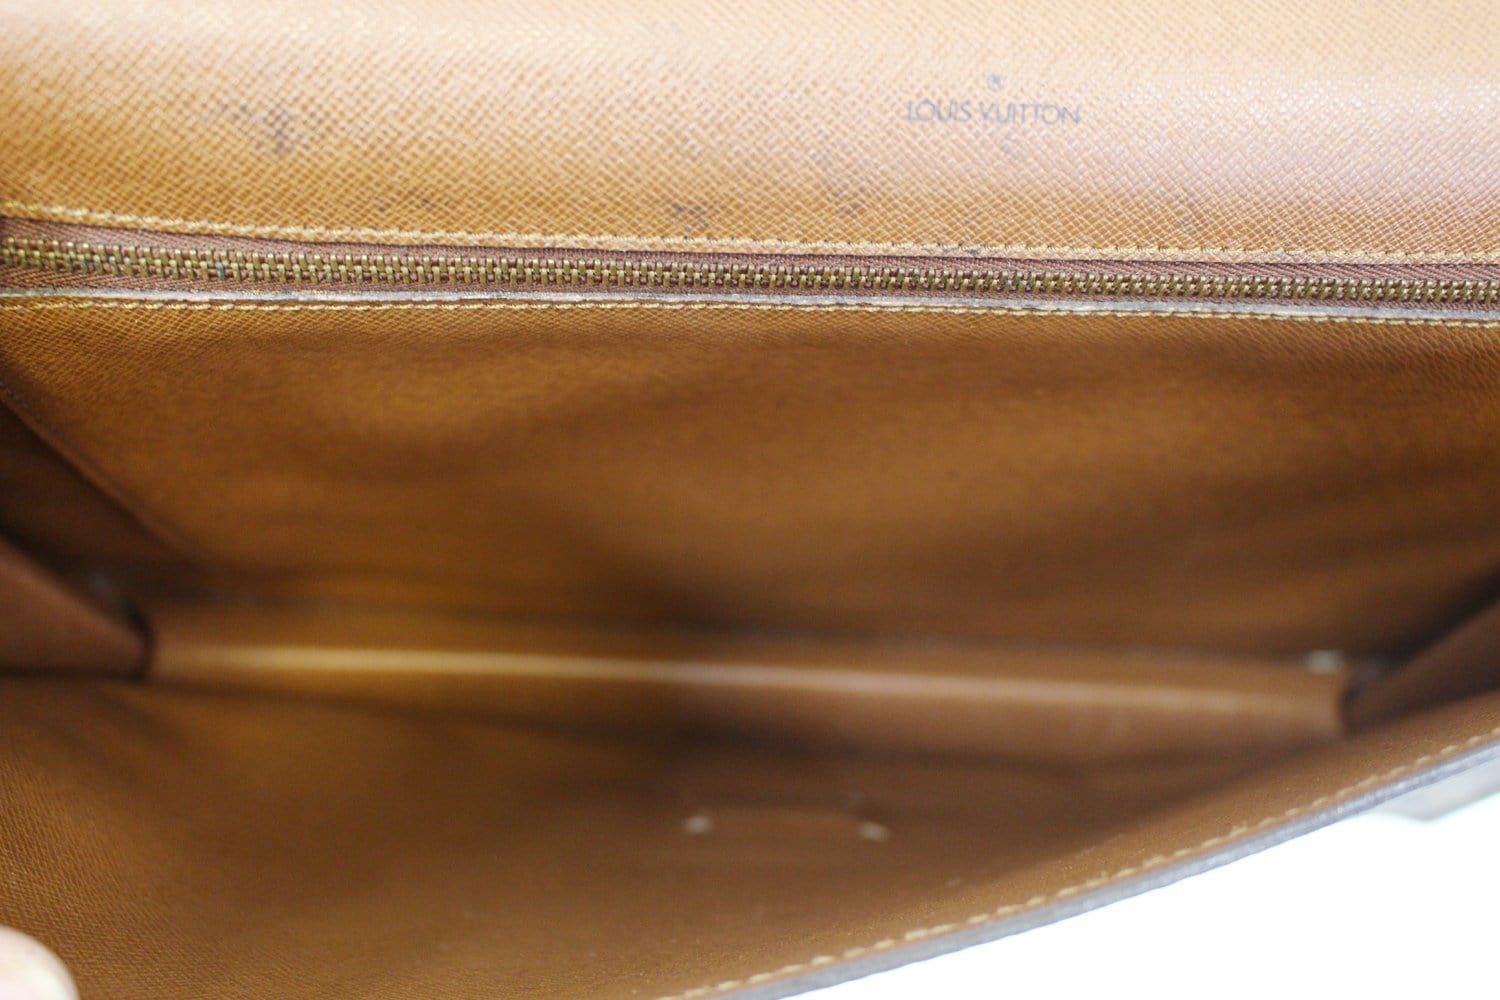 Shop Louis Vuitton Business & Briefcases (M46457) by SolidConnection